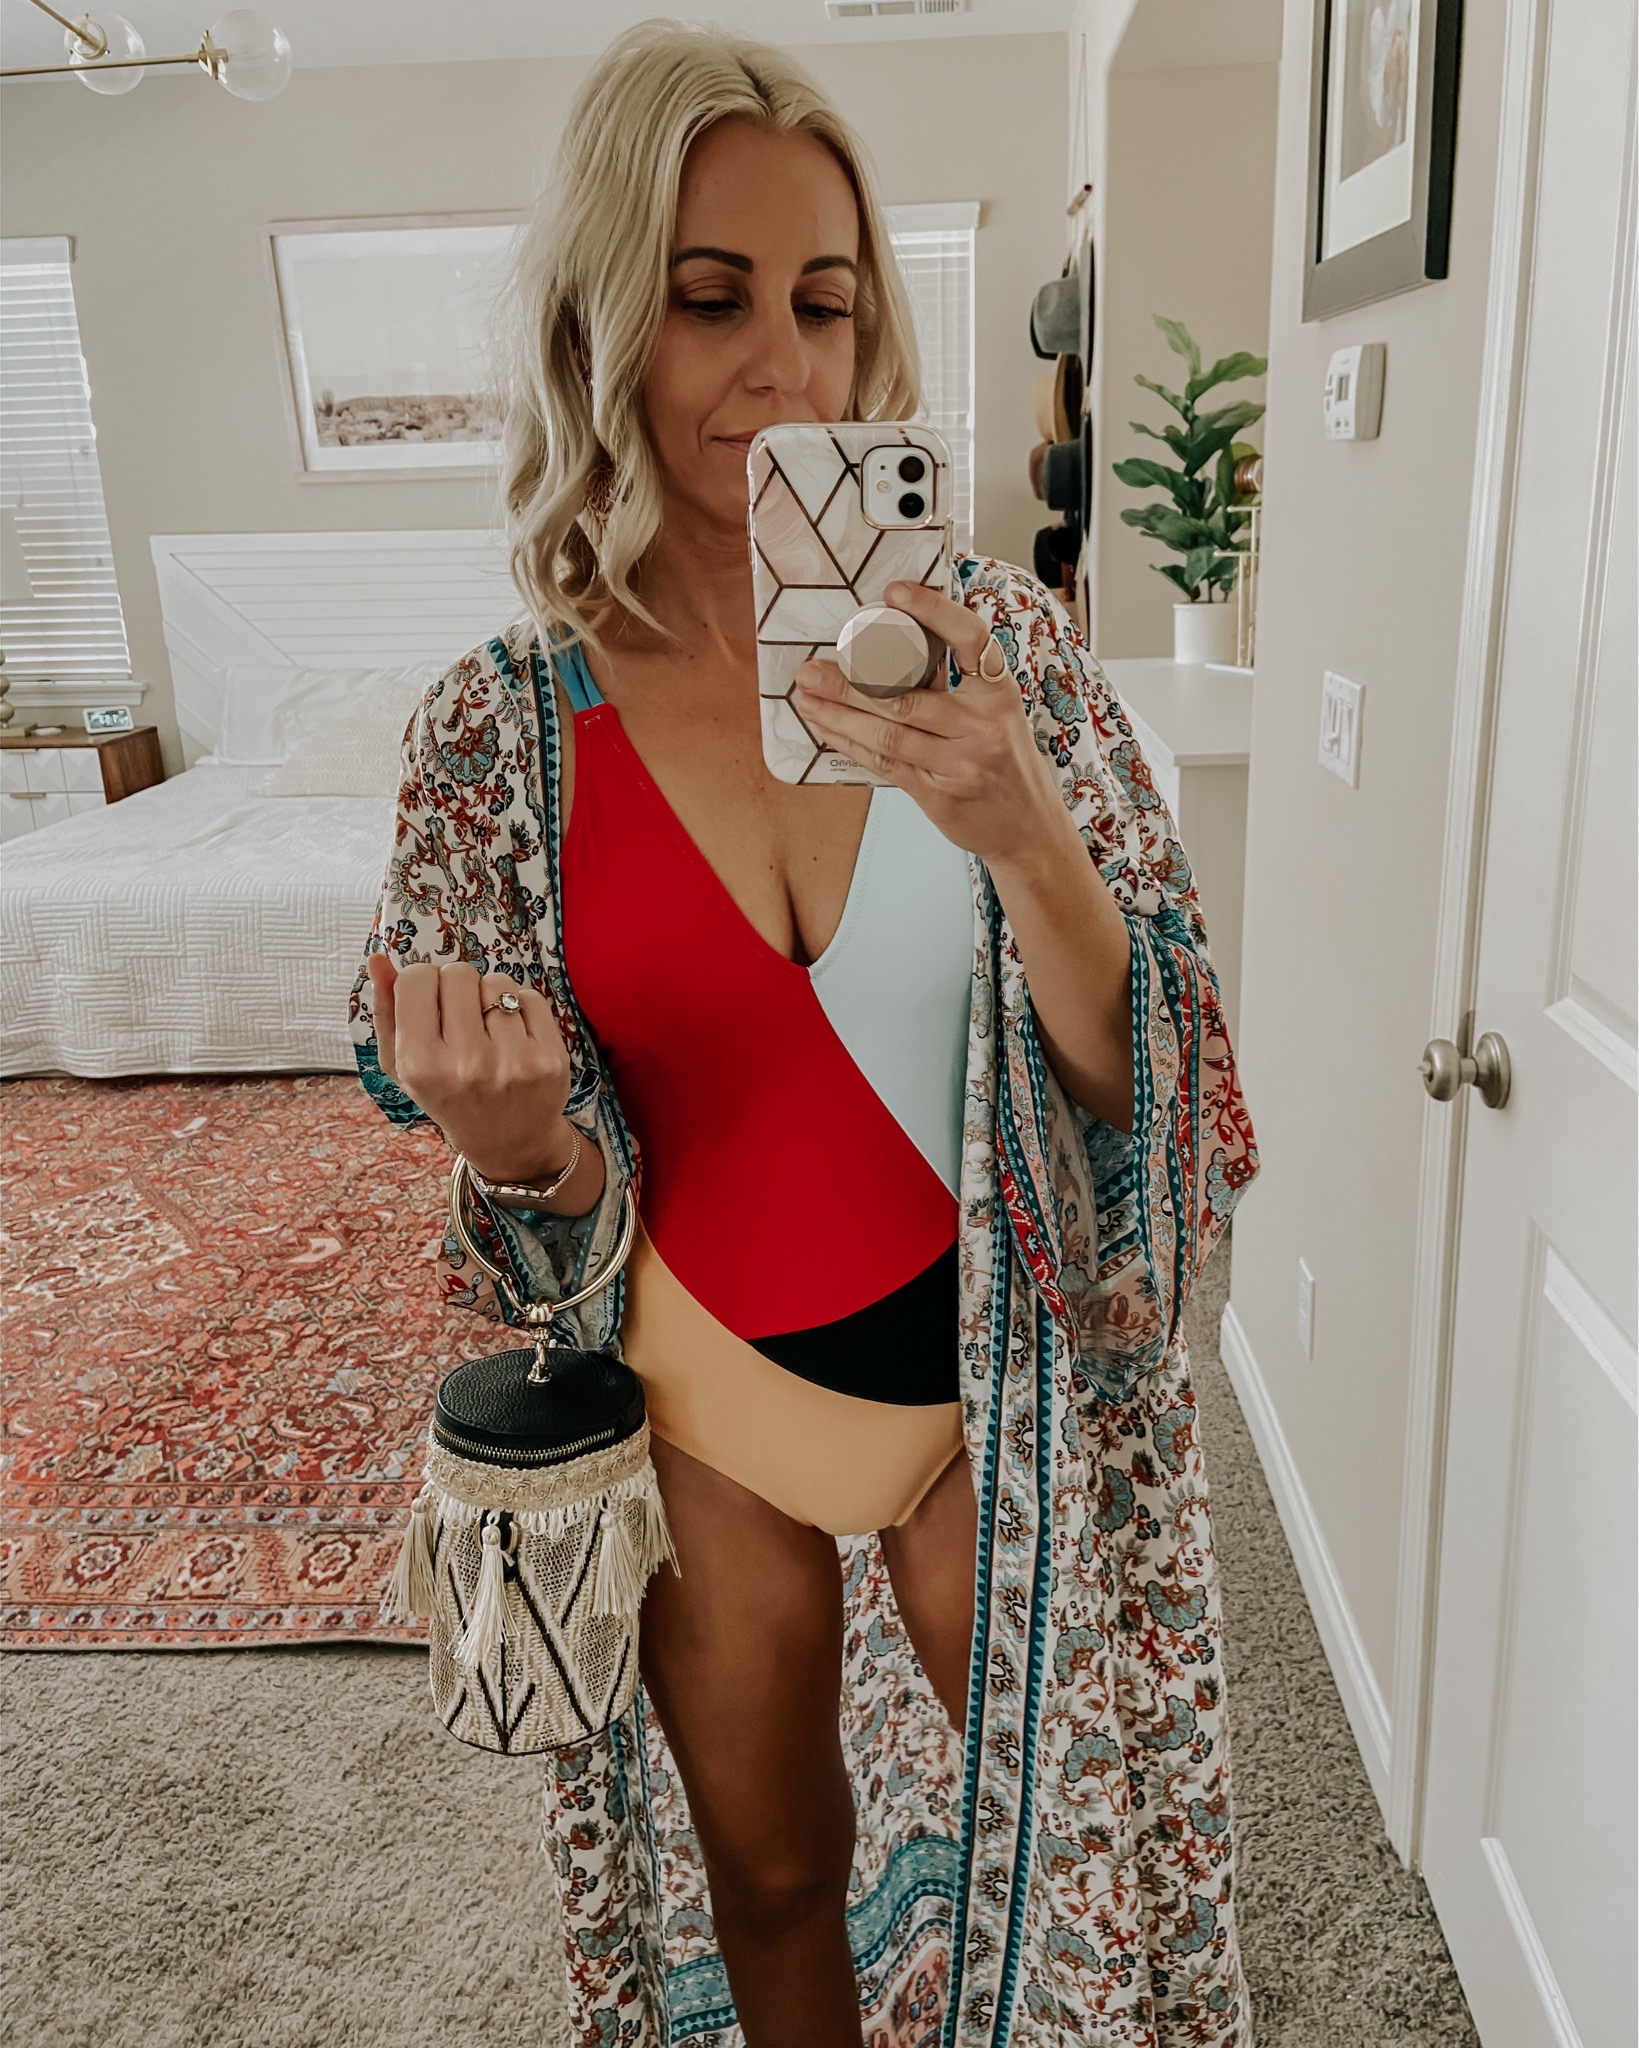 AMAZON ROUNDUP- FEBRUARY 2020- Jaclyn De Leon Style+ Sharing all my favorite Amazon finds from the month of February. Tons of cute spring break looks including swimwear, kimonos, dresses and more.